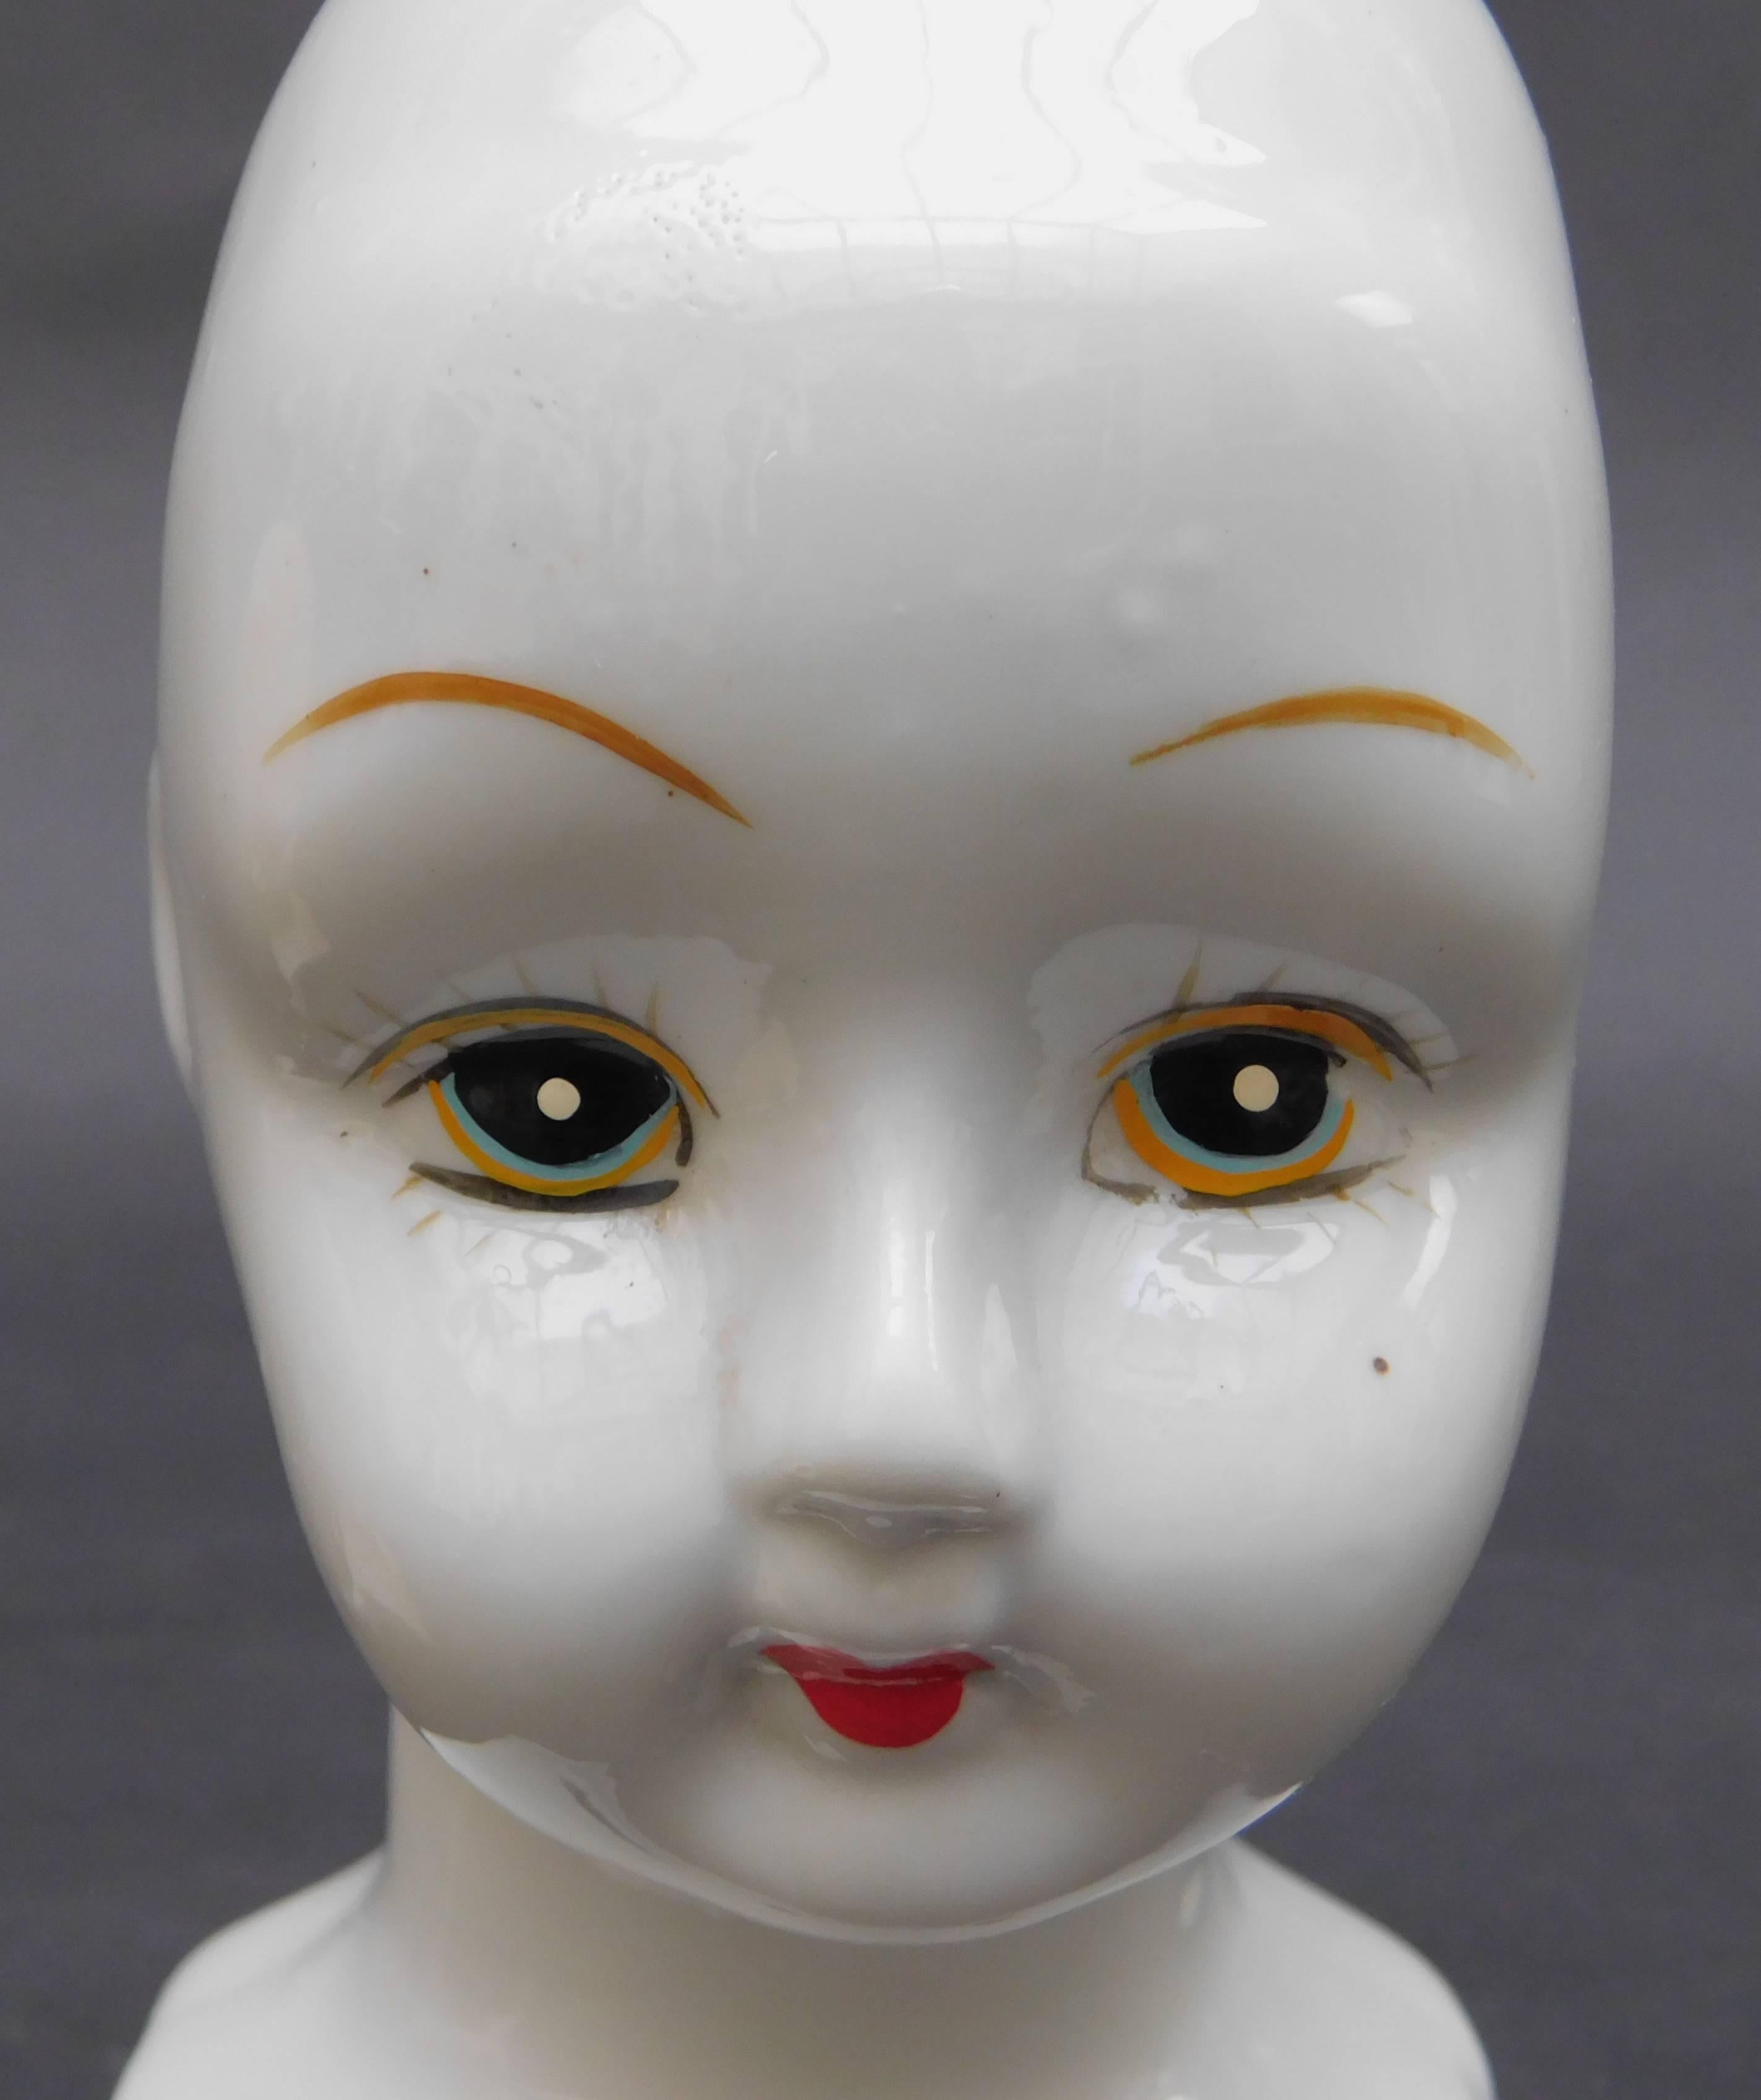 A very interesting sculptural 19th century, German porcelain doll head. I like to see these decorative heads displayed as sculpture curiosities on a bookshelf.